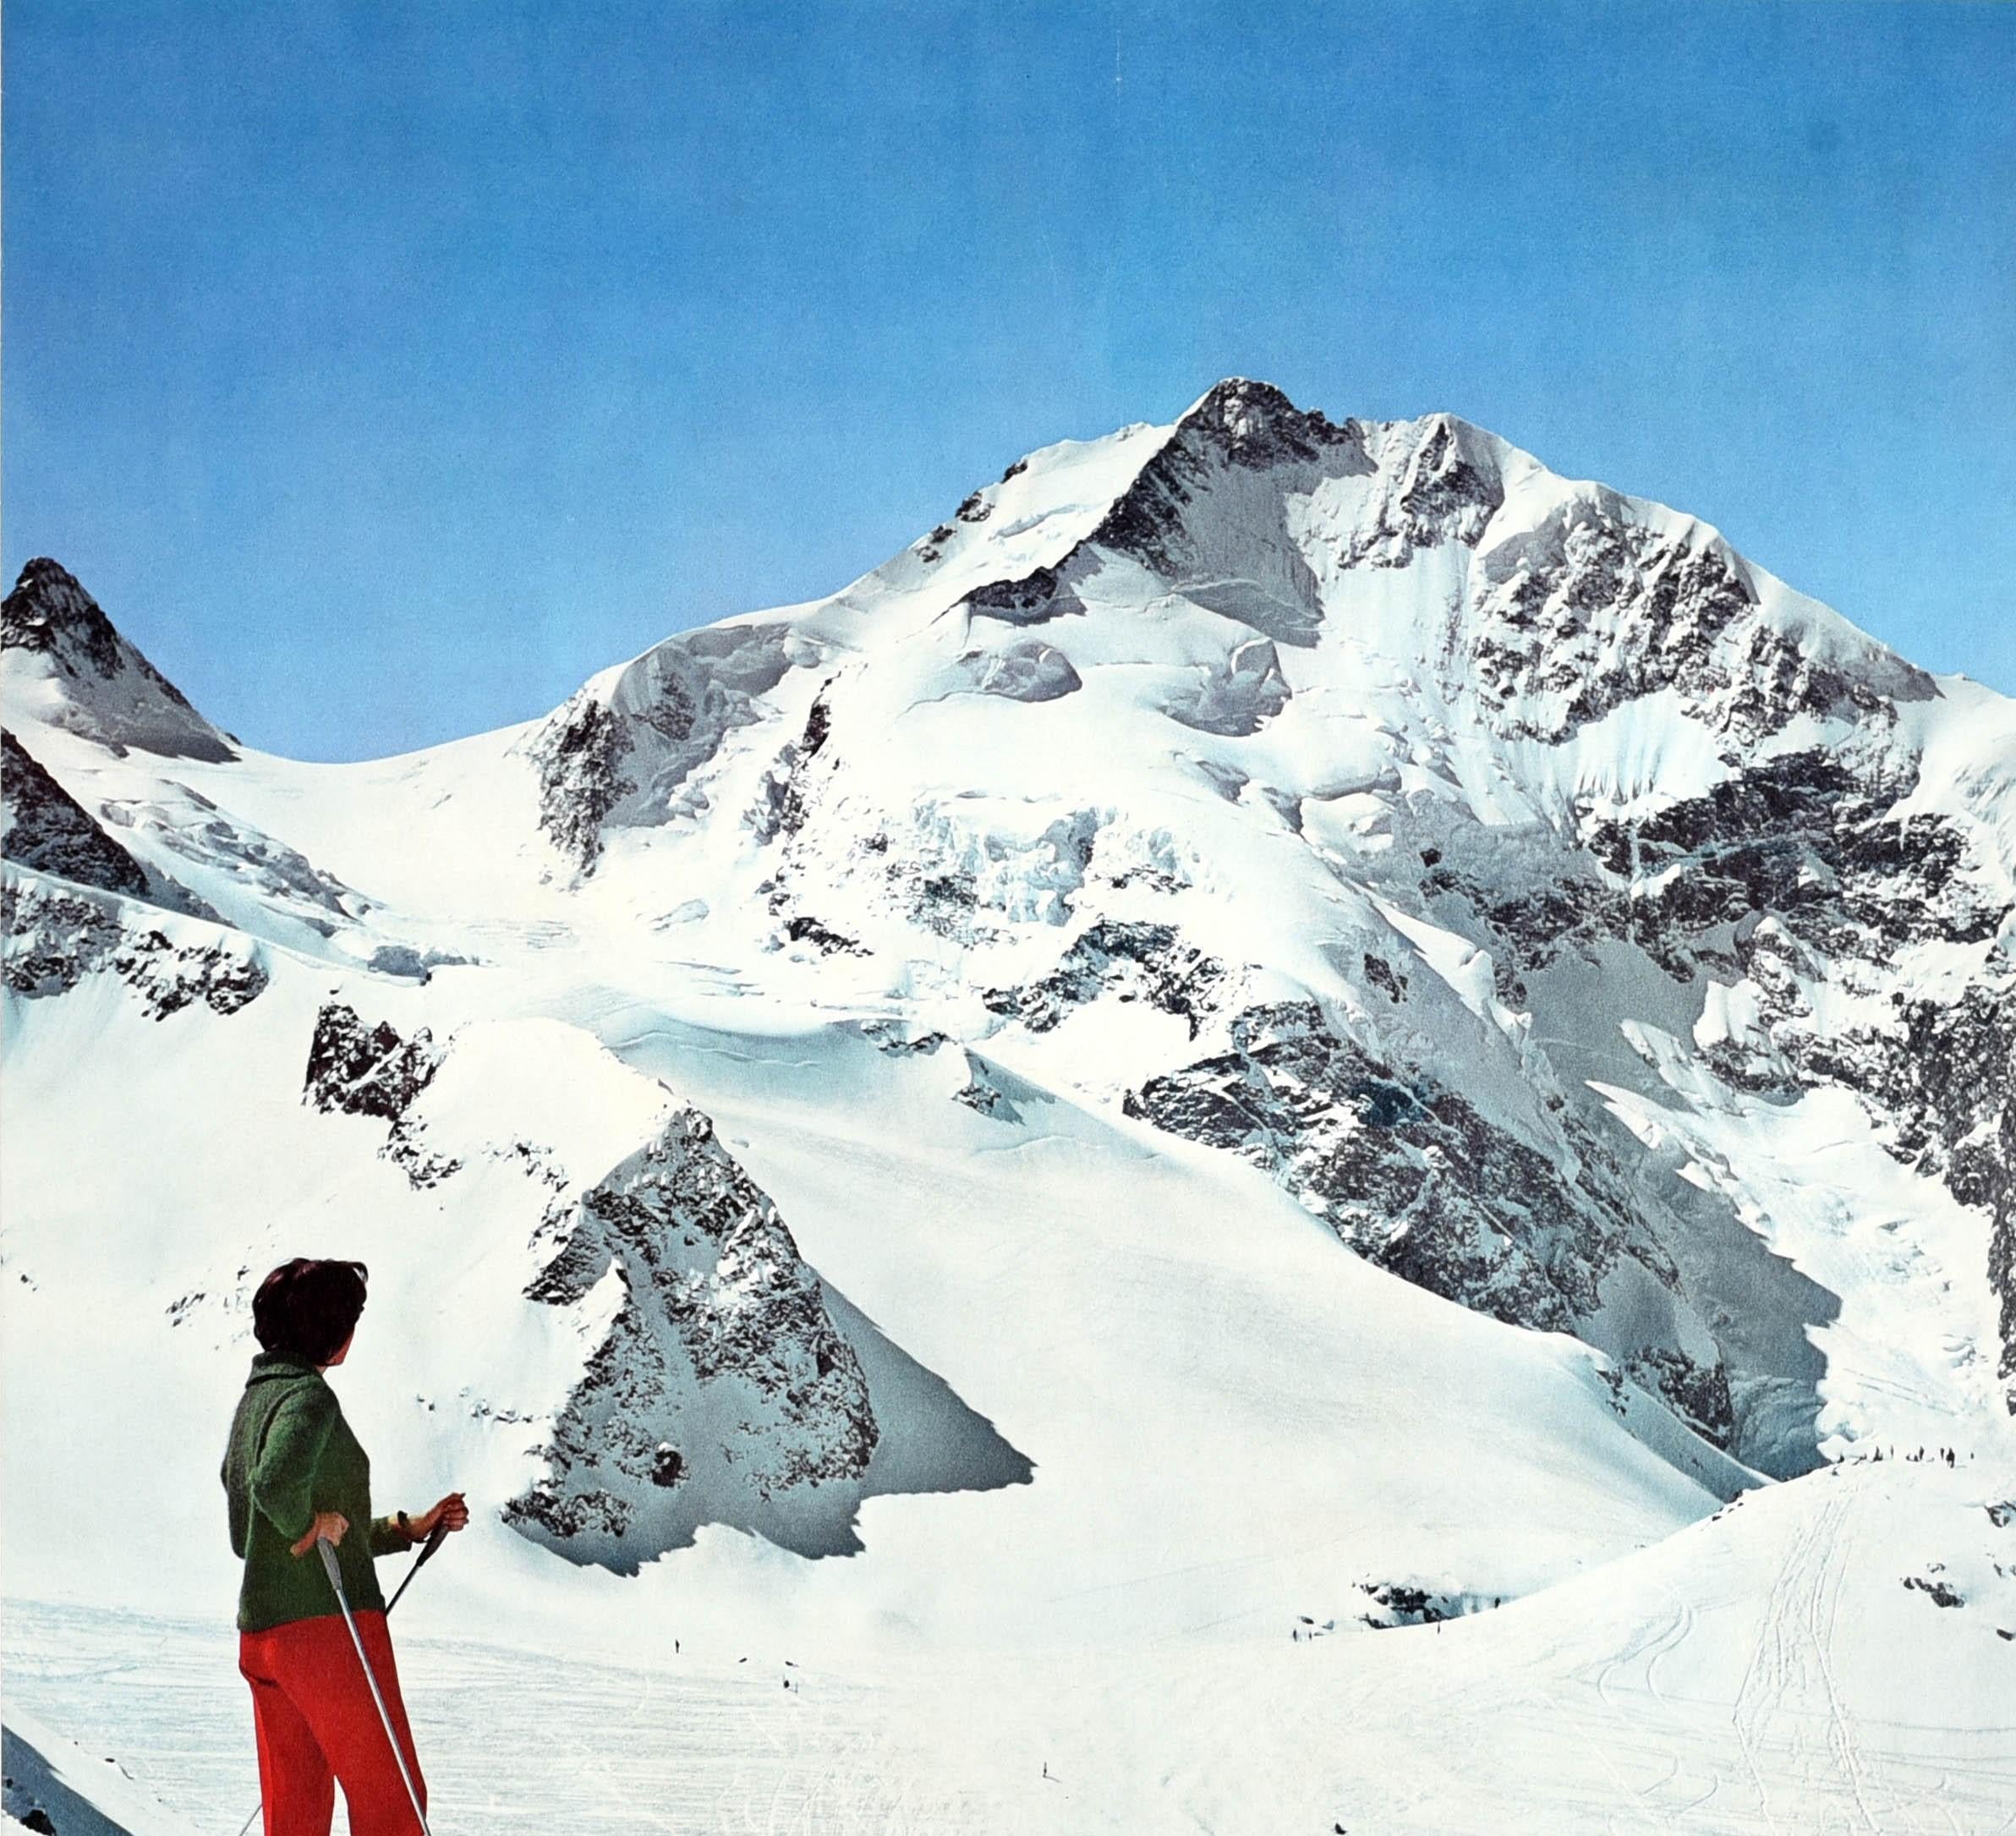 Original vintage winter sport ski poster for the popular Swiss resort of Pontresina featuring a photograph of a lady on skis standing on a mountain and admiring the beauty of the Engadin Alps with a ski lift and skiers on the piste below, the title